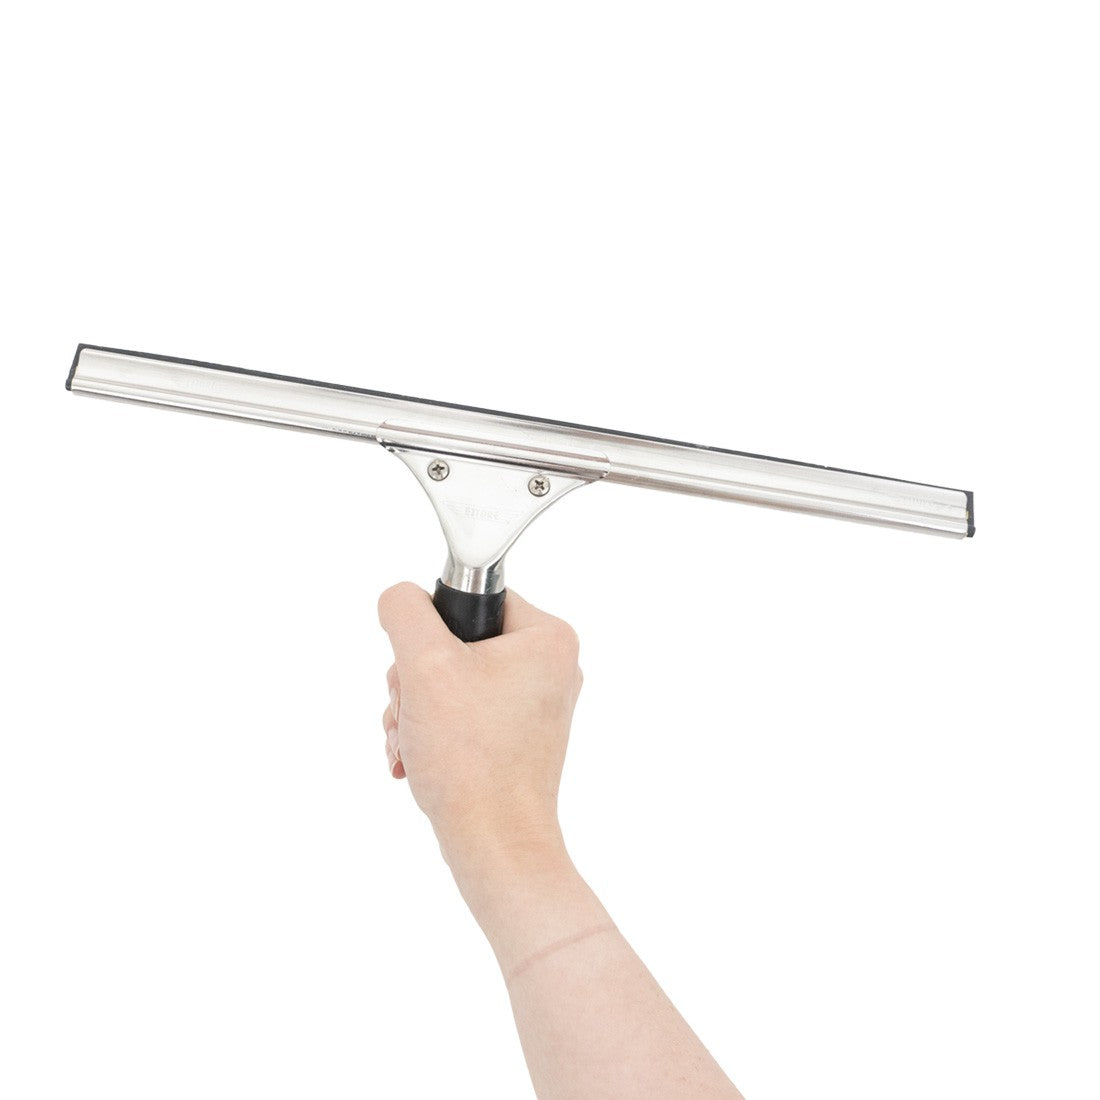 Ettore Complete Stainless Steel with Rubber Grip Squeegee - In Hand Full View